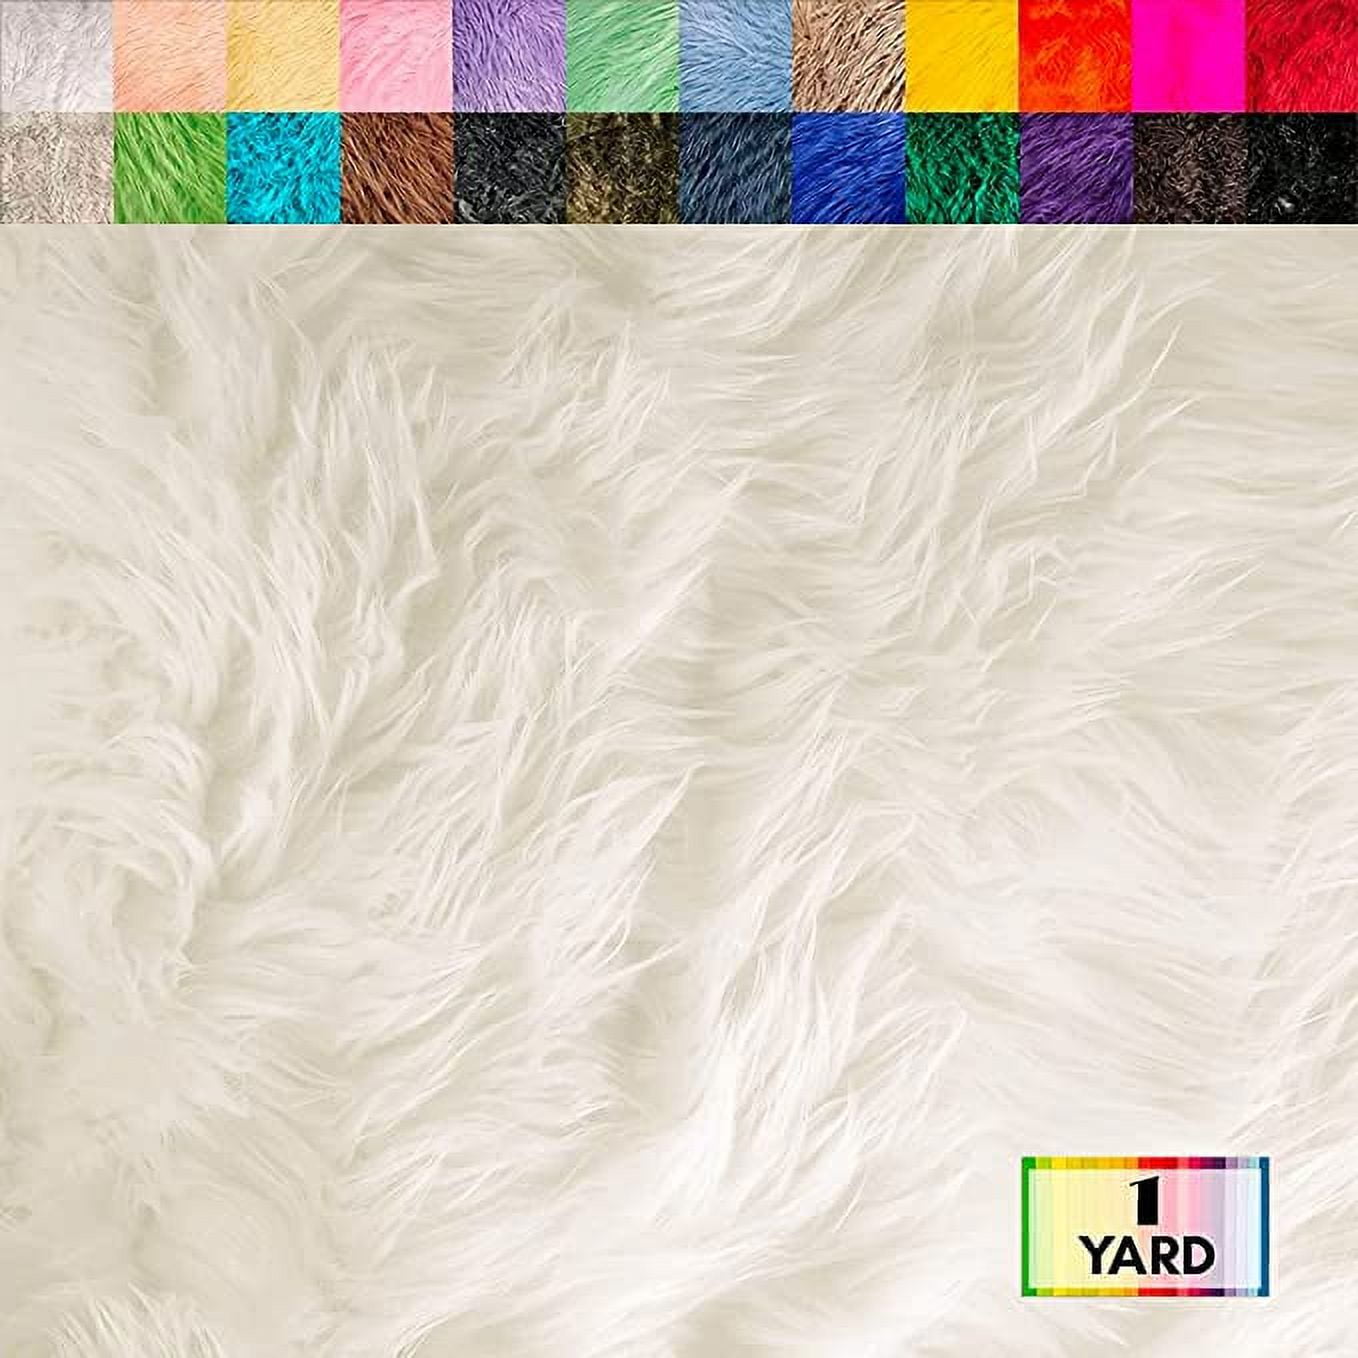 FabricLA Shaggy Faux Fur Fabric by The Yard - 36 x 60 Inches (90 cm x 150  cm) - Fake Fur Fabric for Sewing Apparel, Vests, Jackets, Rugs, Pillows -  Faux Fluffy